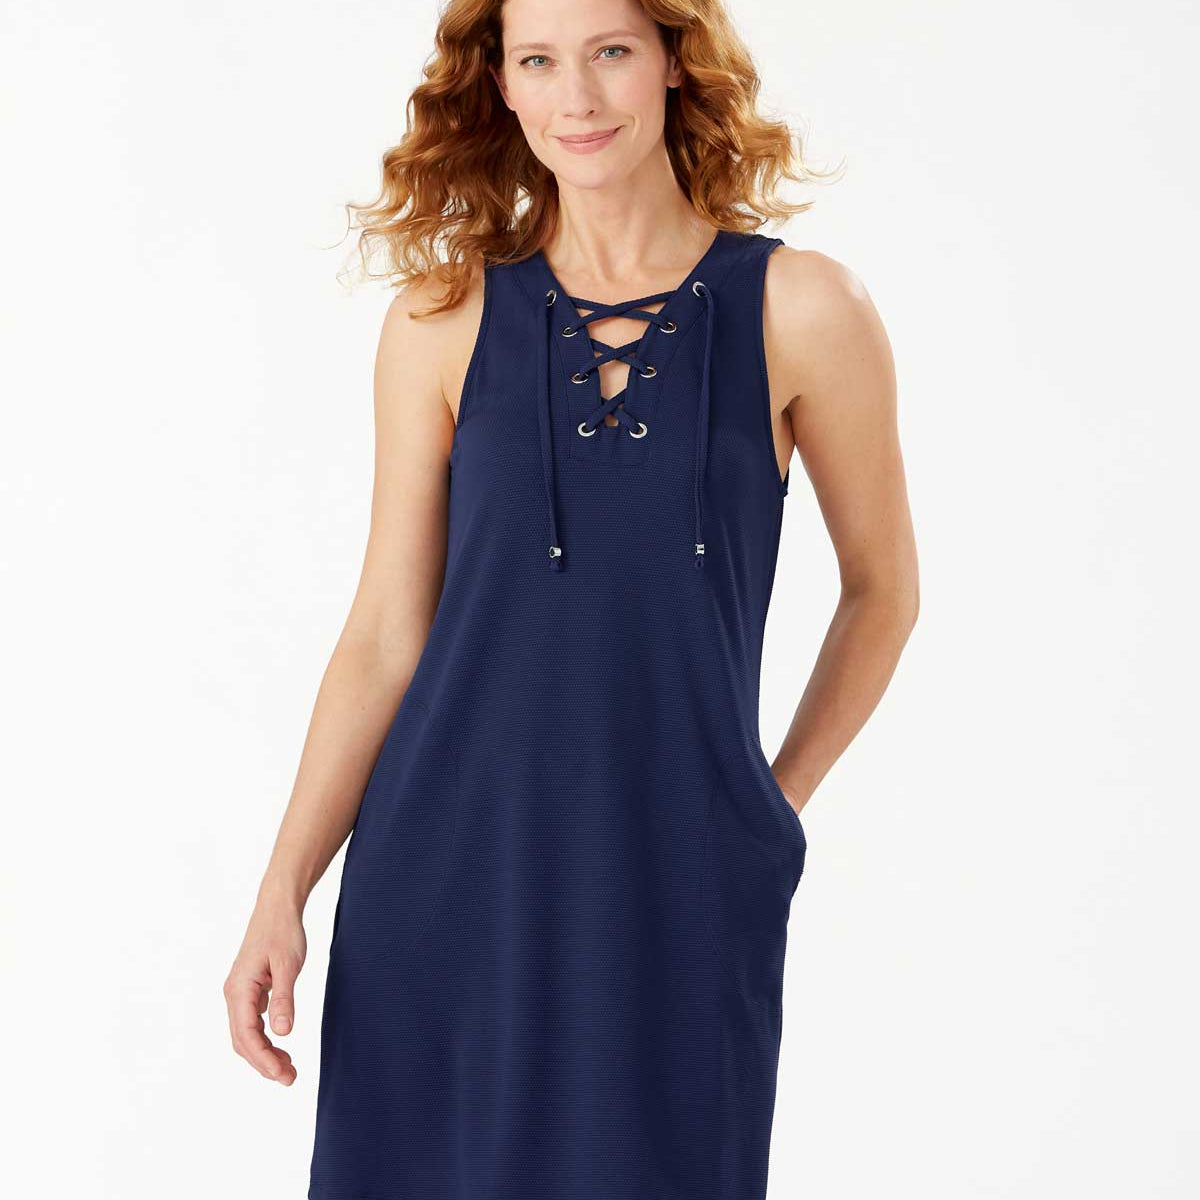 Tommy Bahama: Pique Colada Lace-Up Dress - MARE NAVY